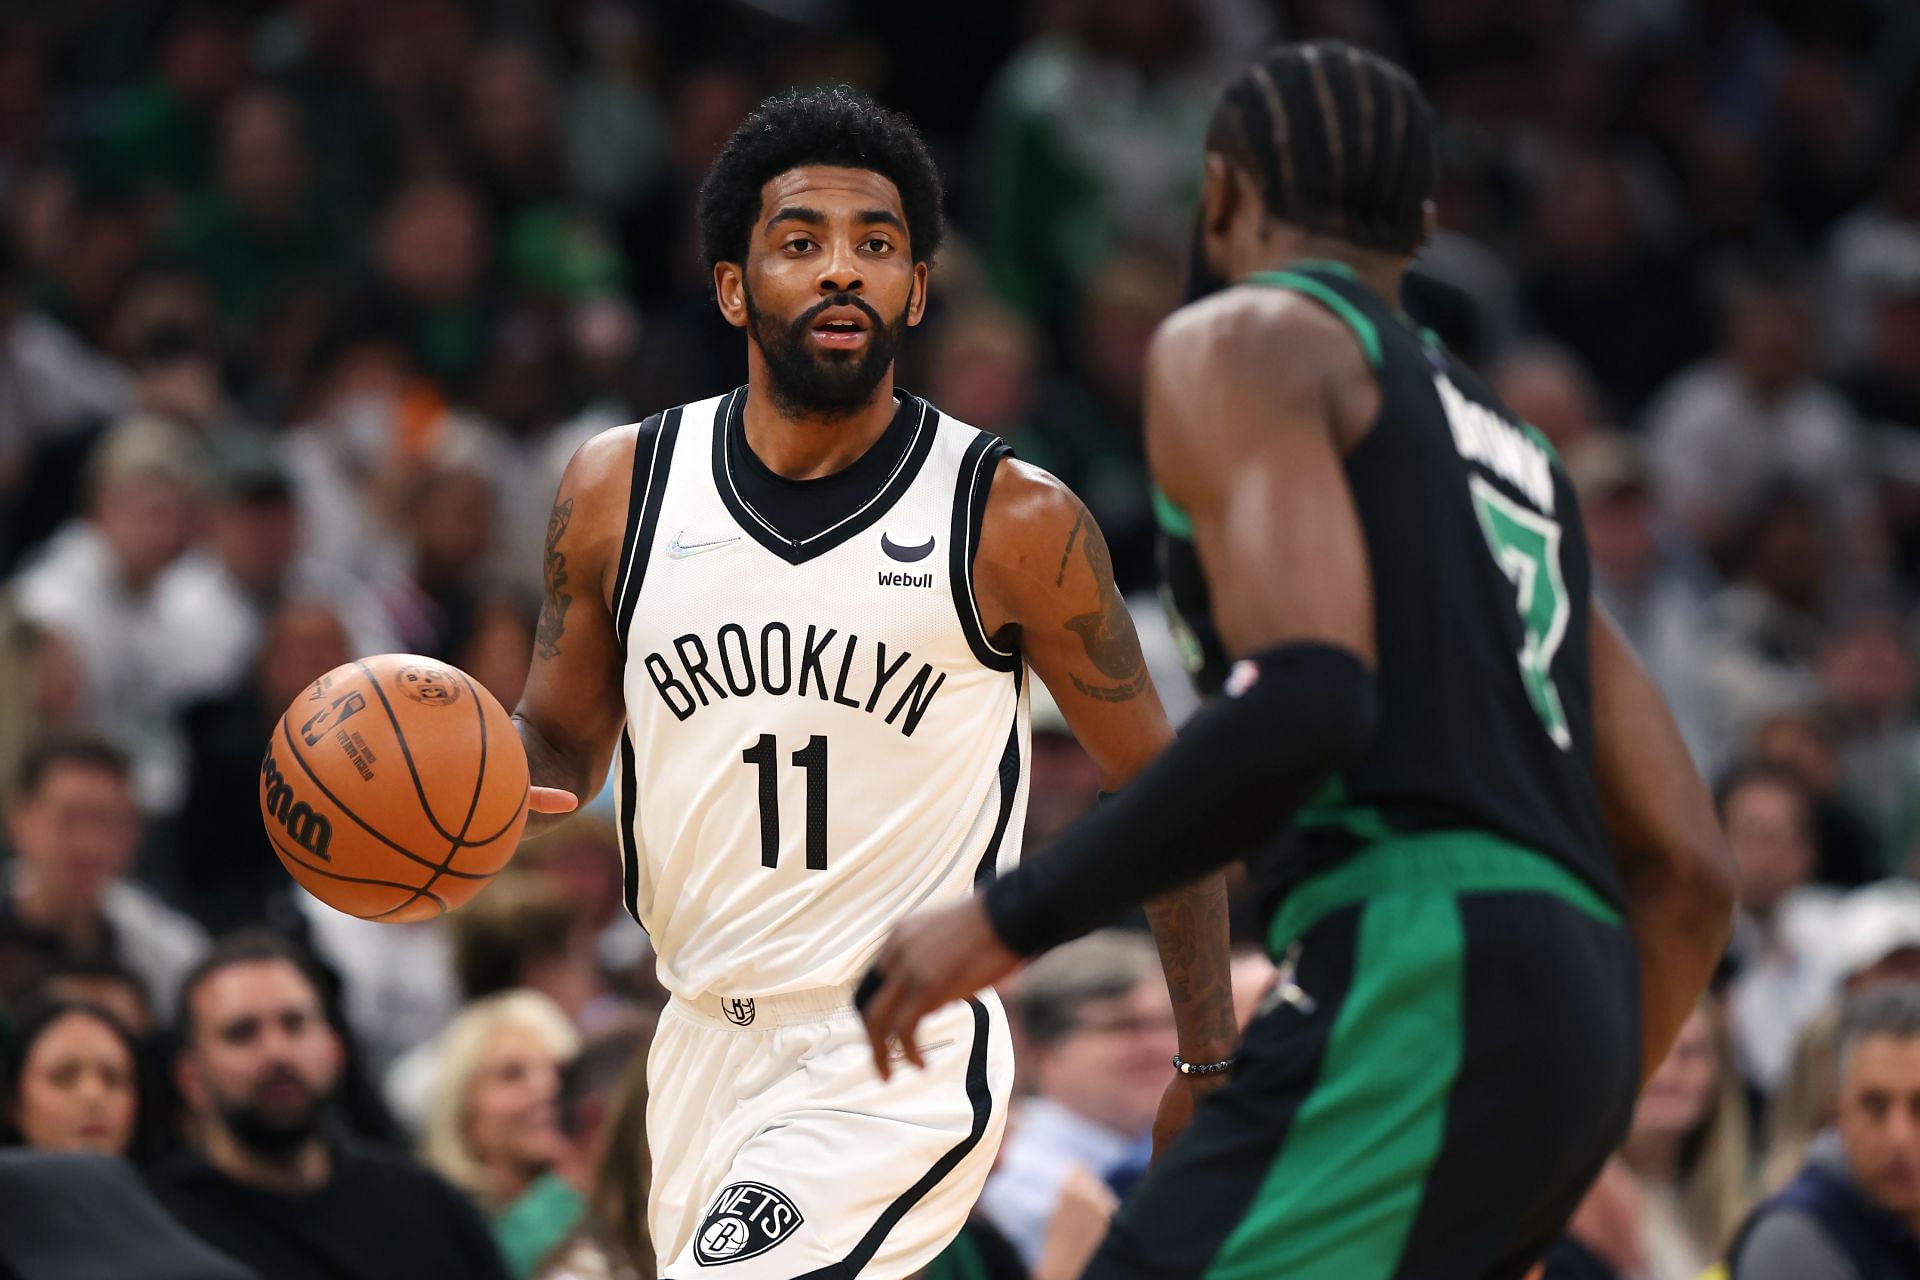 Kyrie Irving of the Brooklyn Nets in Game 1 against the Boston Celtics.